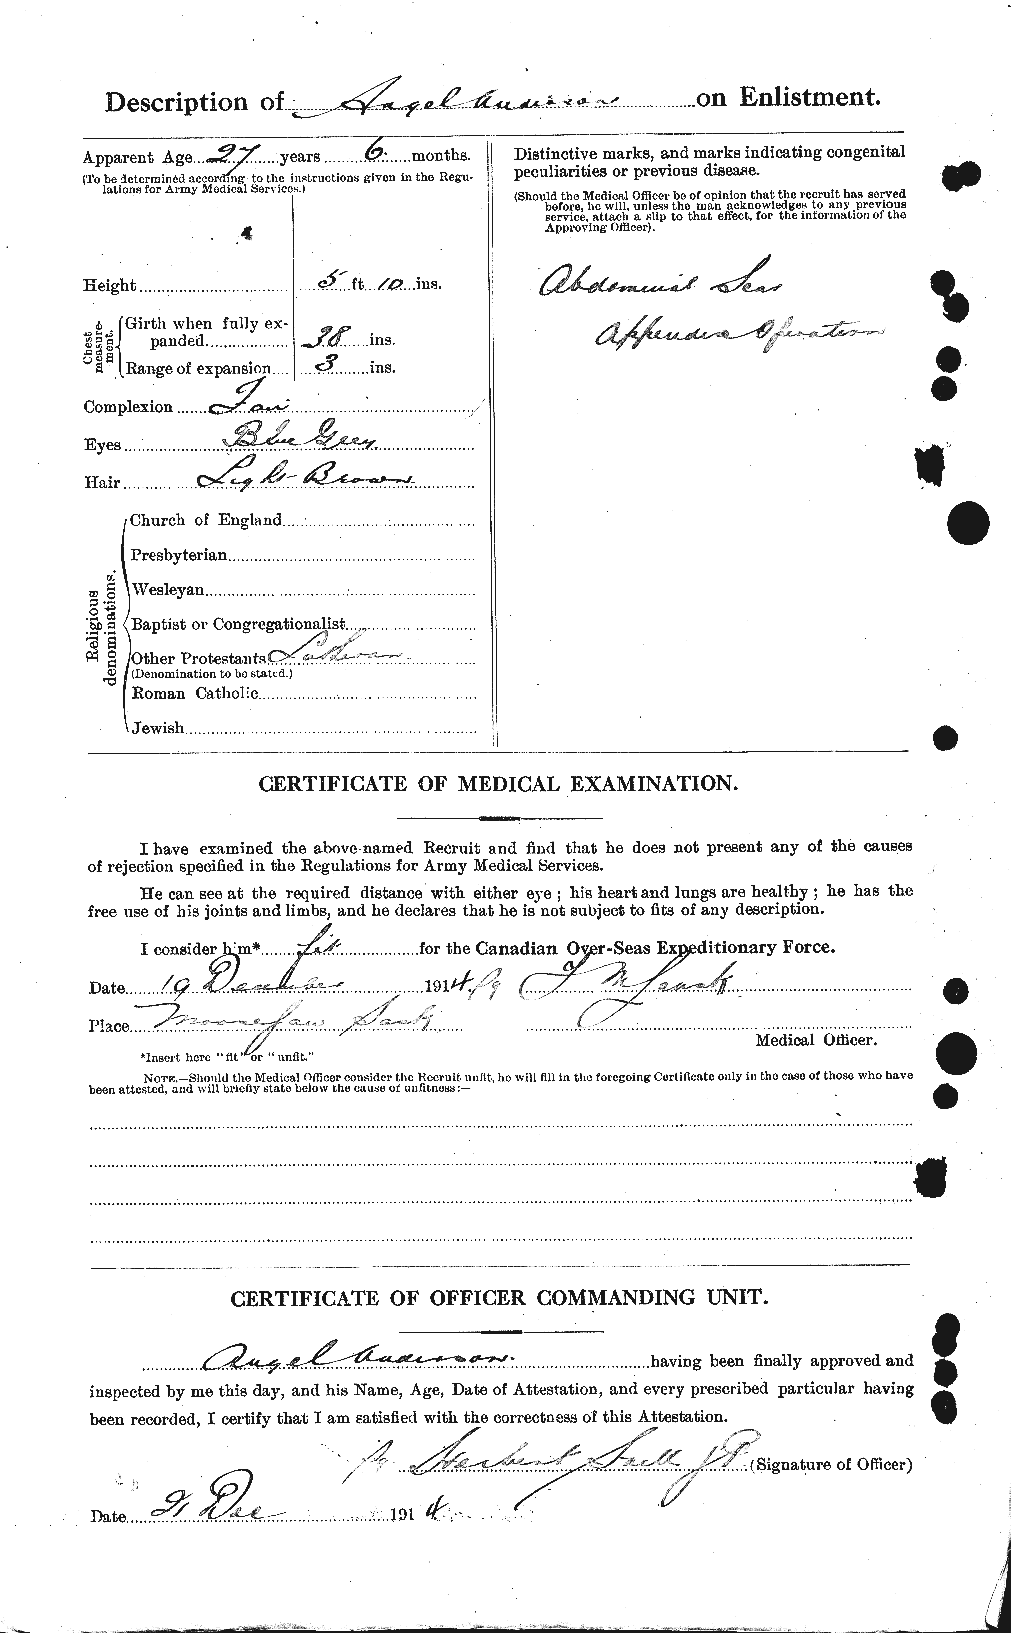 Personnel Records of the First World War - CEF 209392b